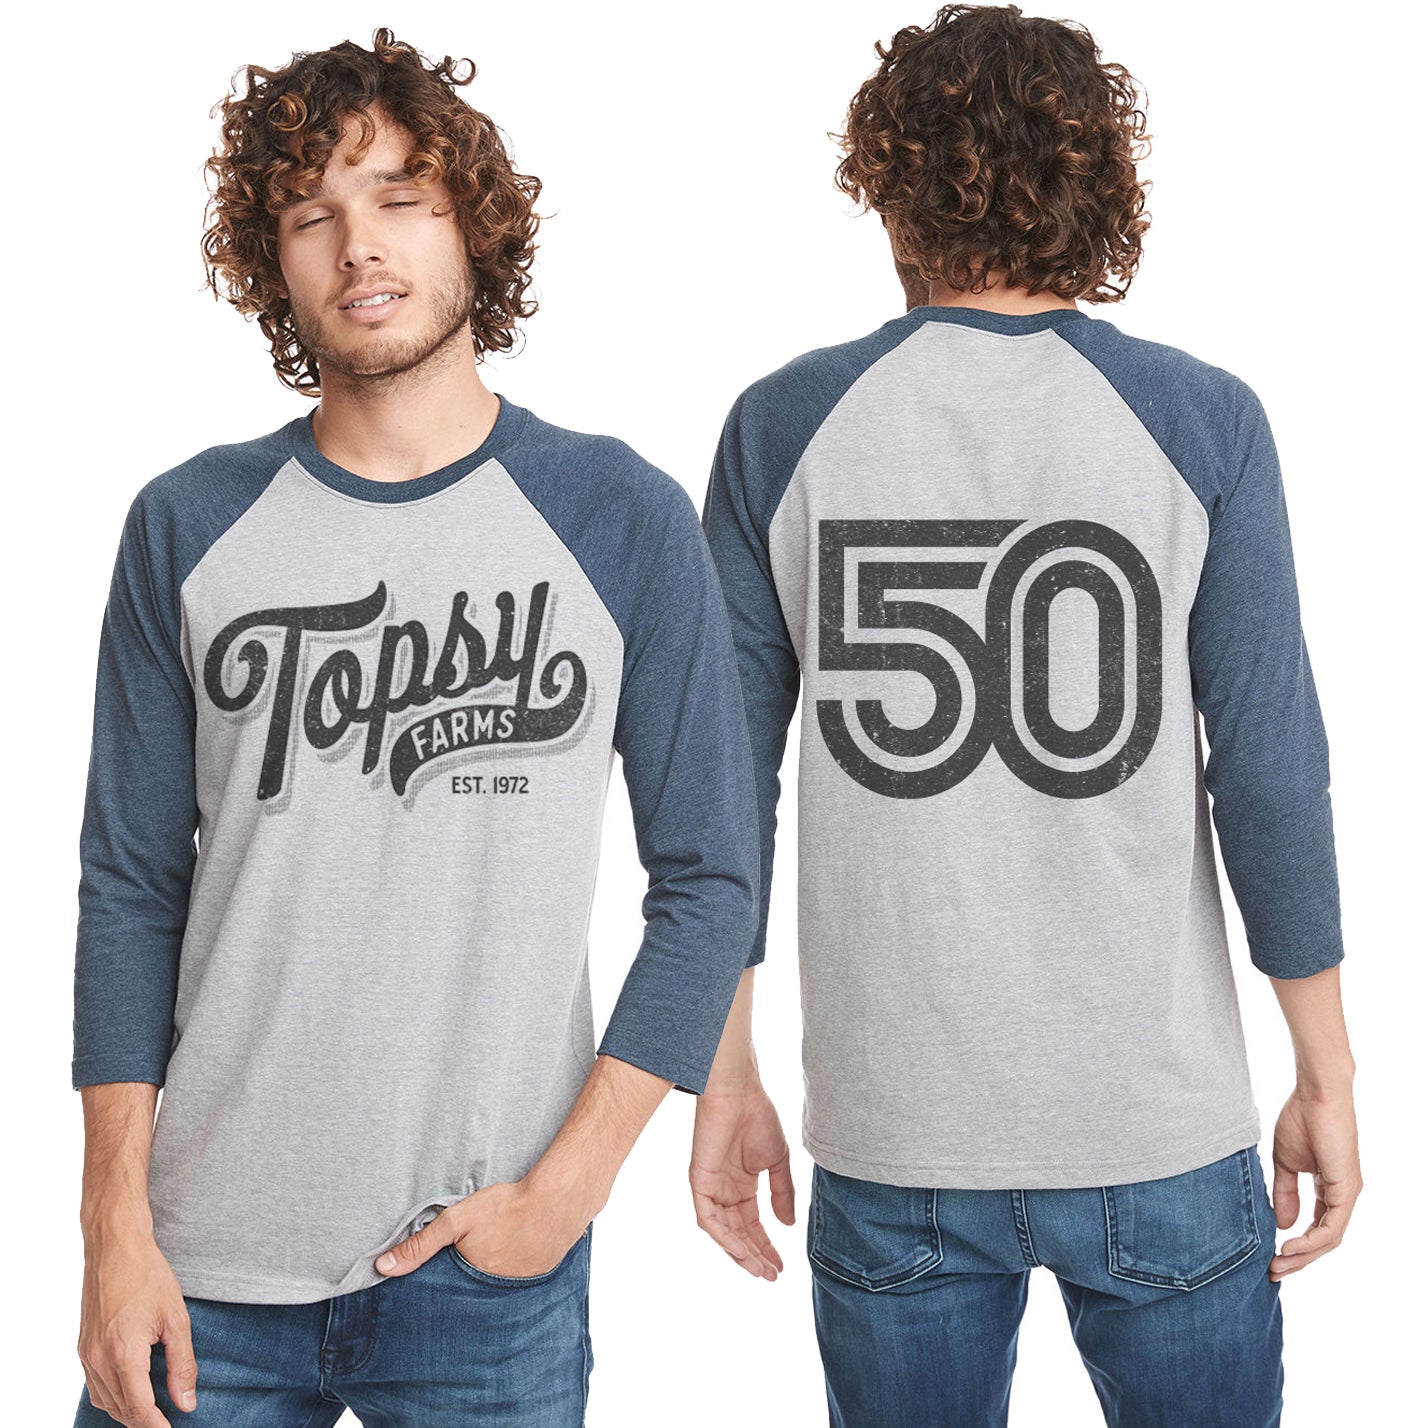 Curly haired man in grey Topsy Farms' baseball shirt with blue heather sleeves and large number 50 on the back